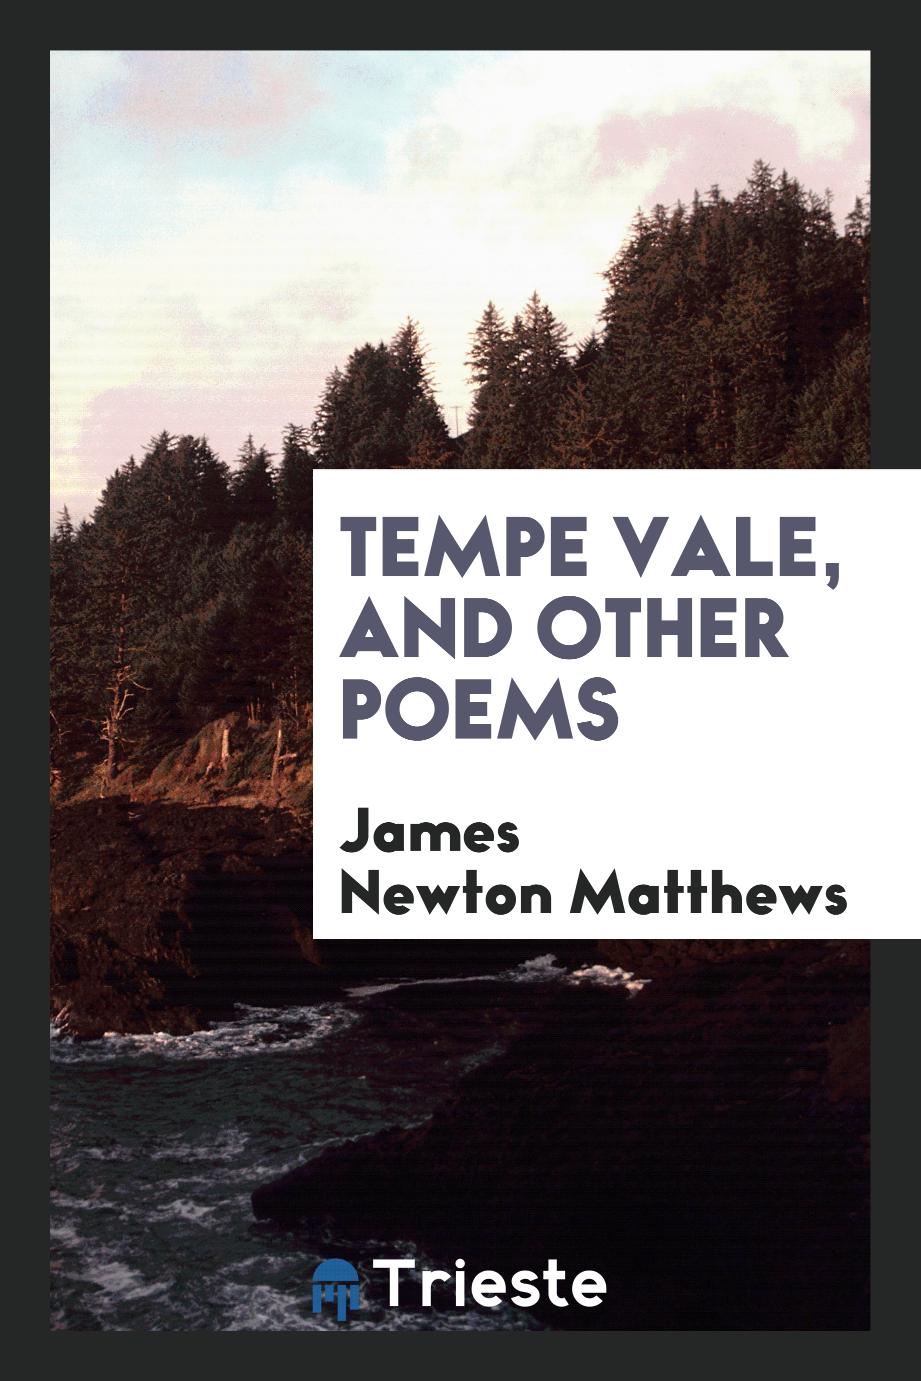 Tempe vale, and other poems